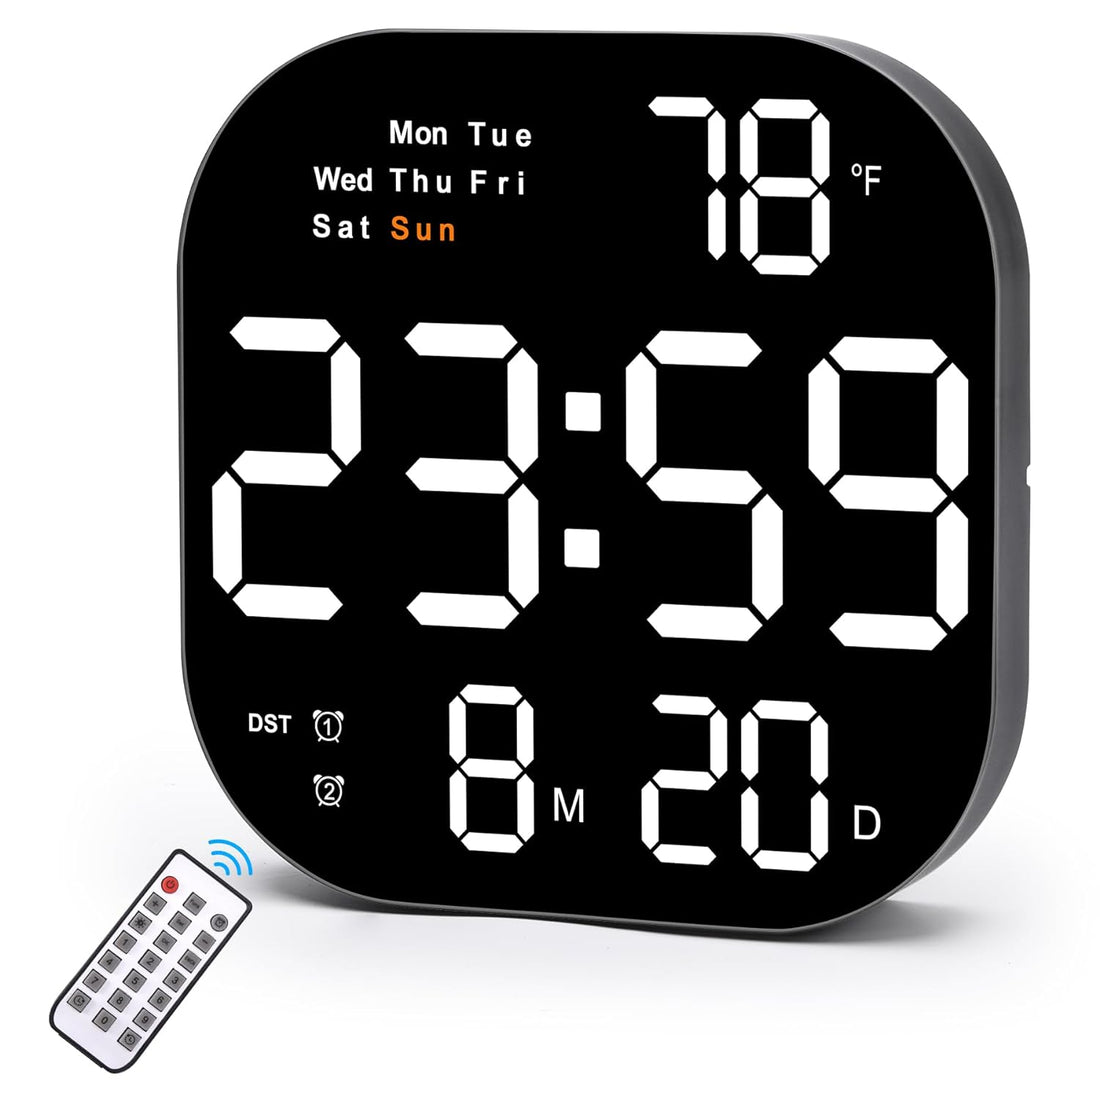 SZELAM Digital Wall Clock, 10.5” LED Digital Alarm Clock Large Display with Remote Control, Date and Temperature, Auto Dimming, Day of Week, for Living Room Office Bedroom Decor Elderly - White